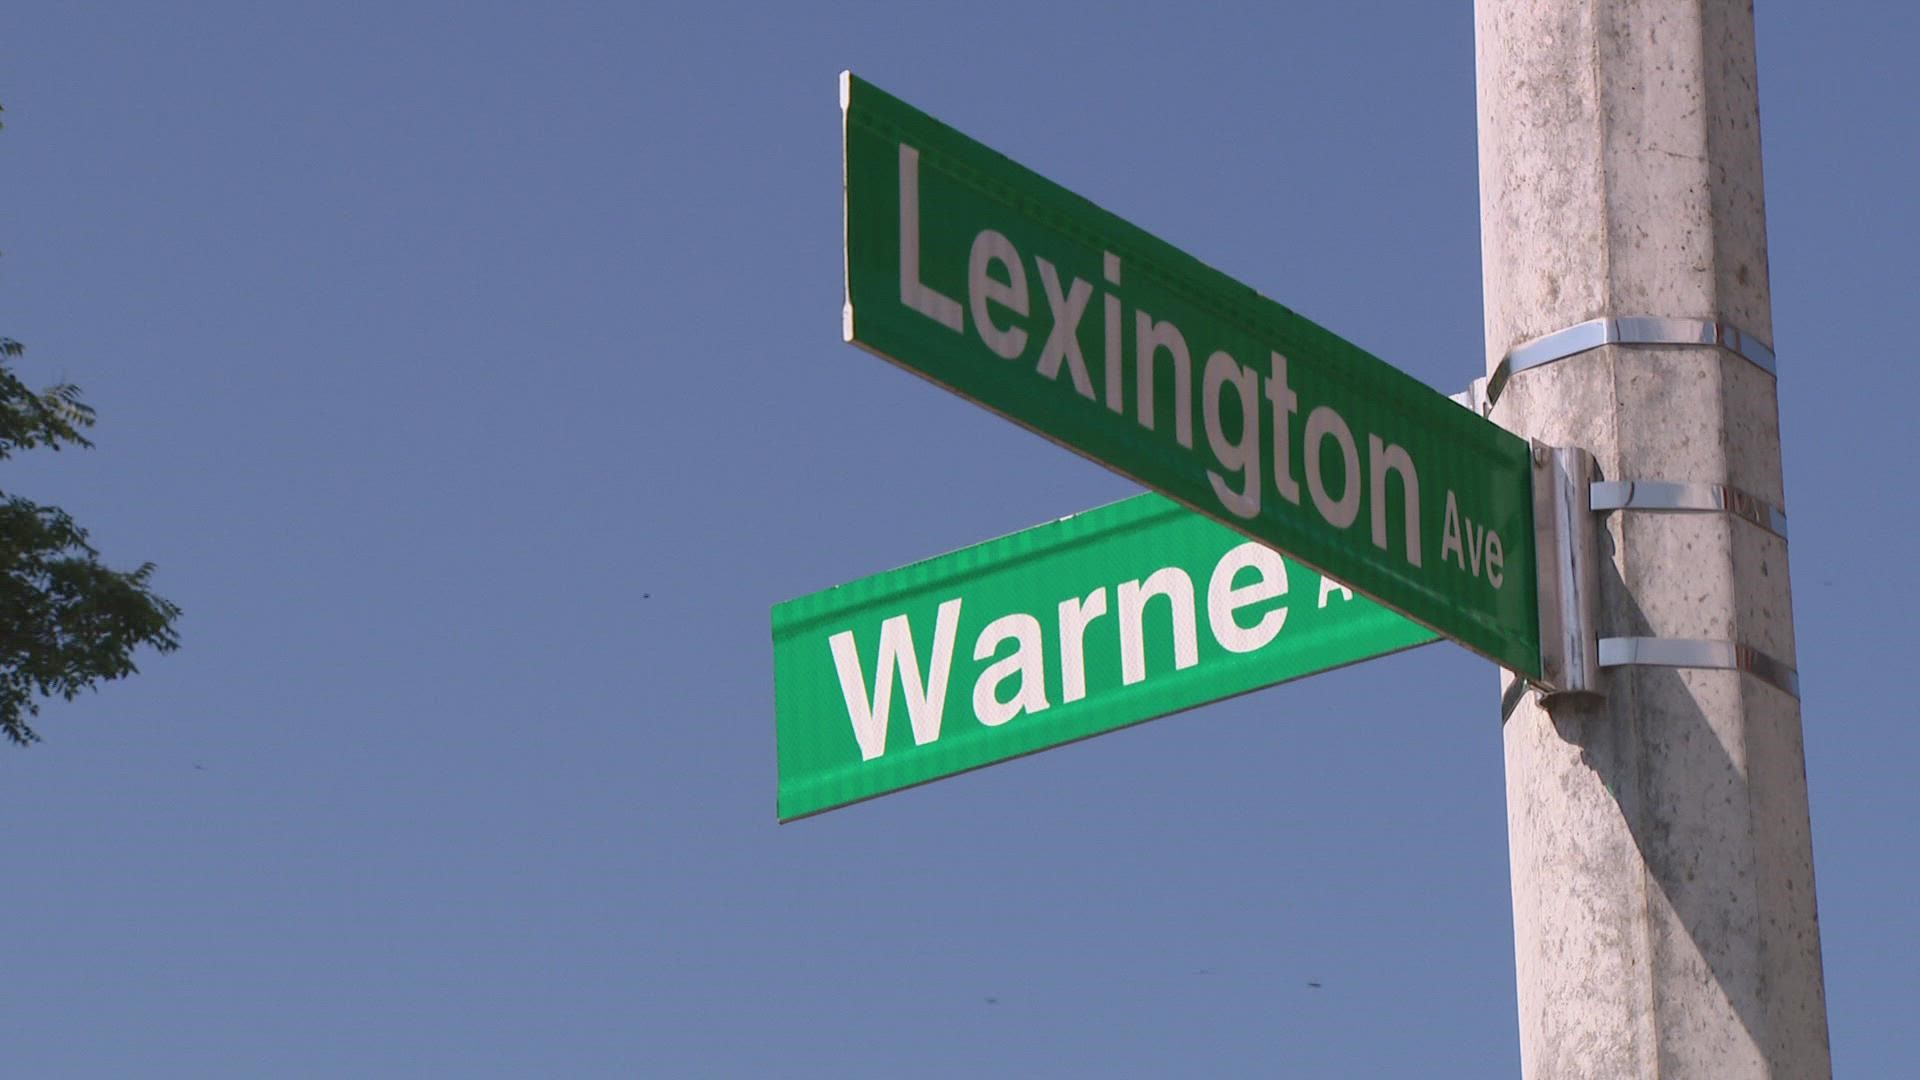 Homicide detectives were called Monday morning to a home on Lexington Avenue, where police said they found a woman dead.